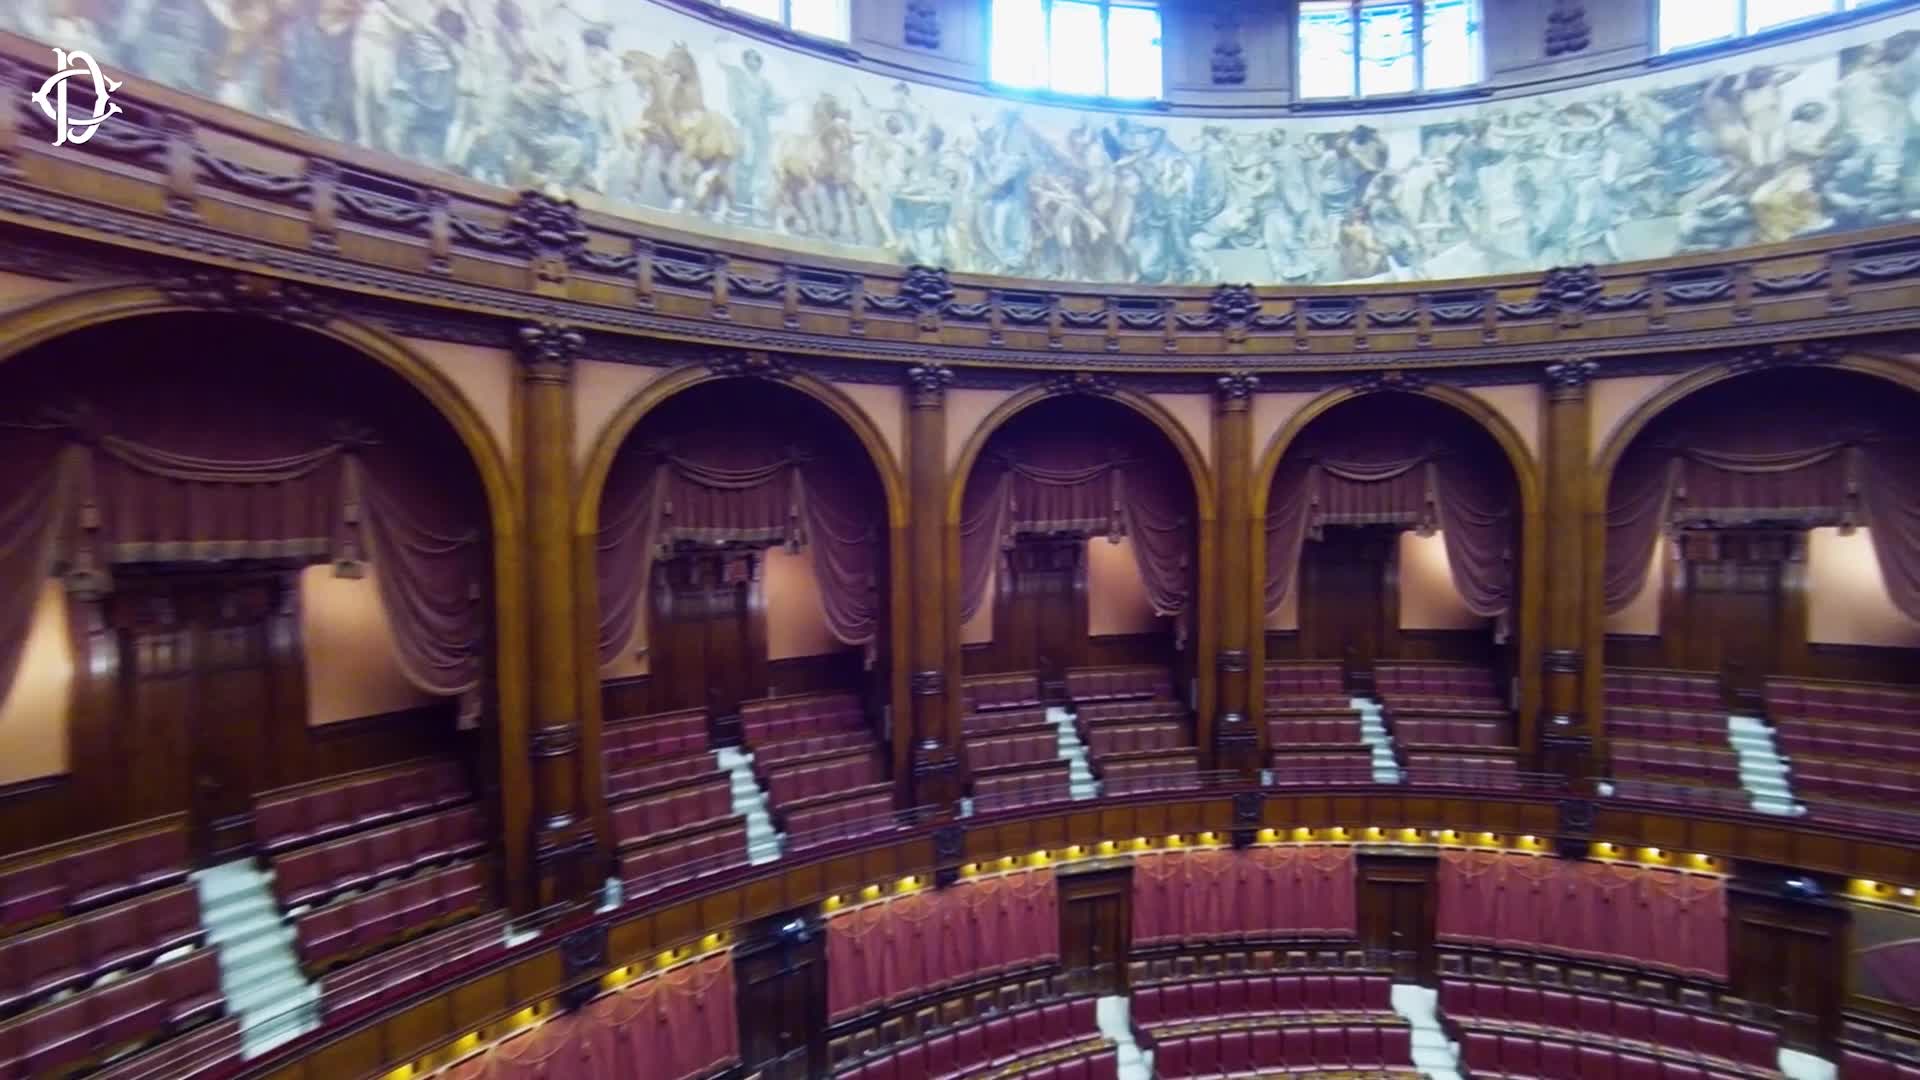 Welcome to the Chamber of Deputies